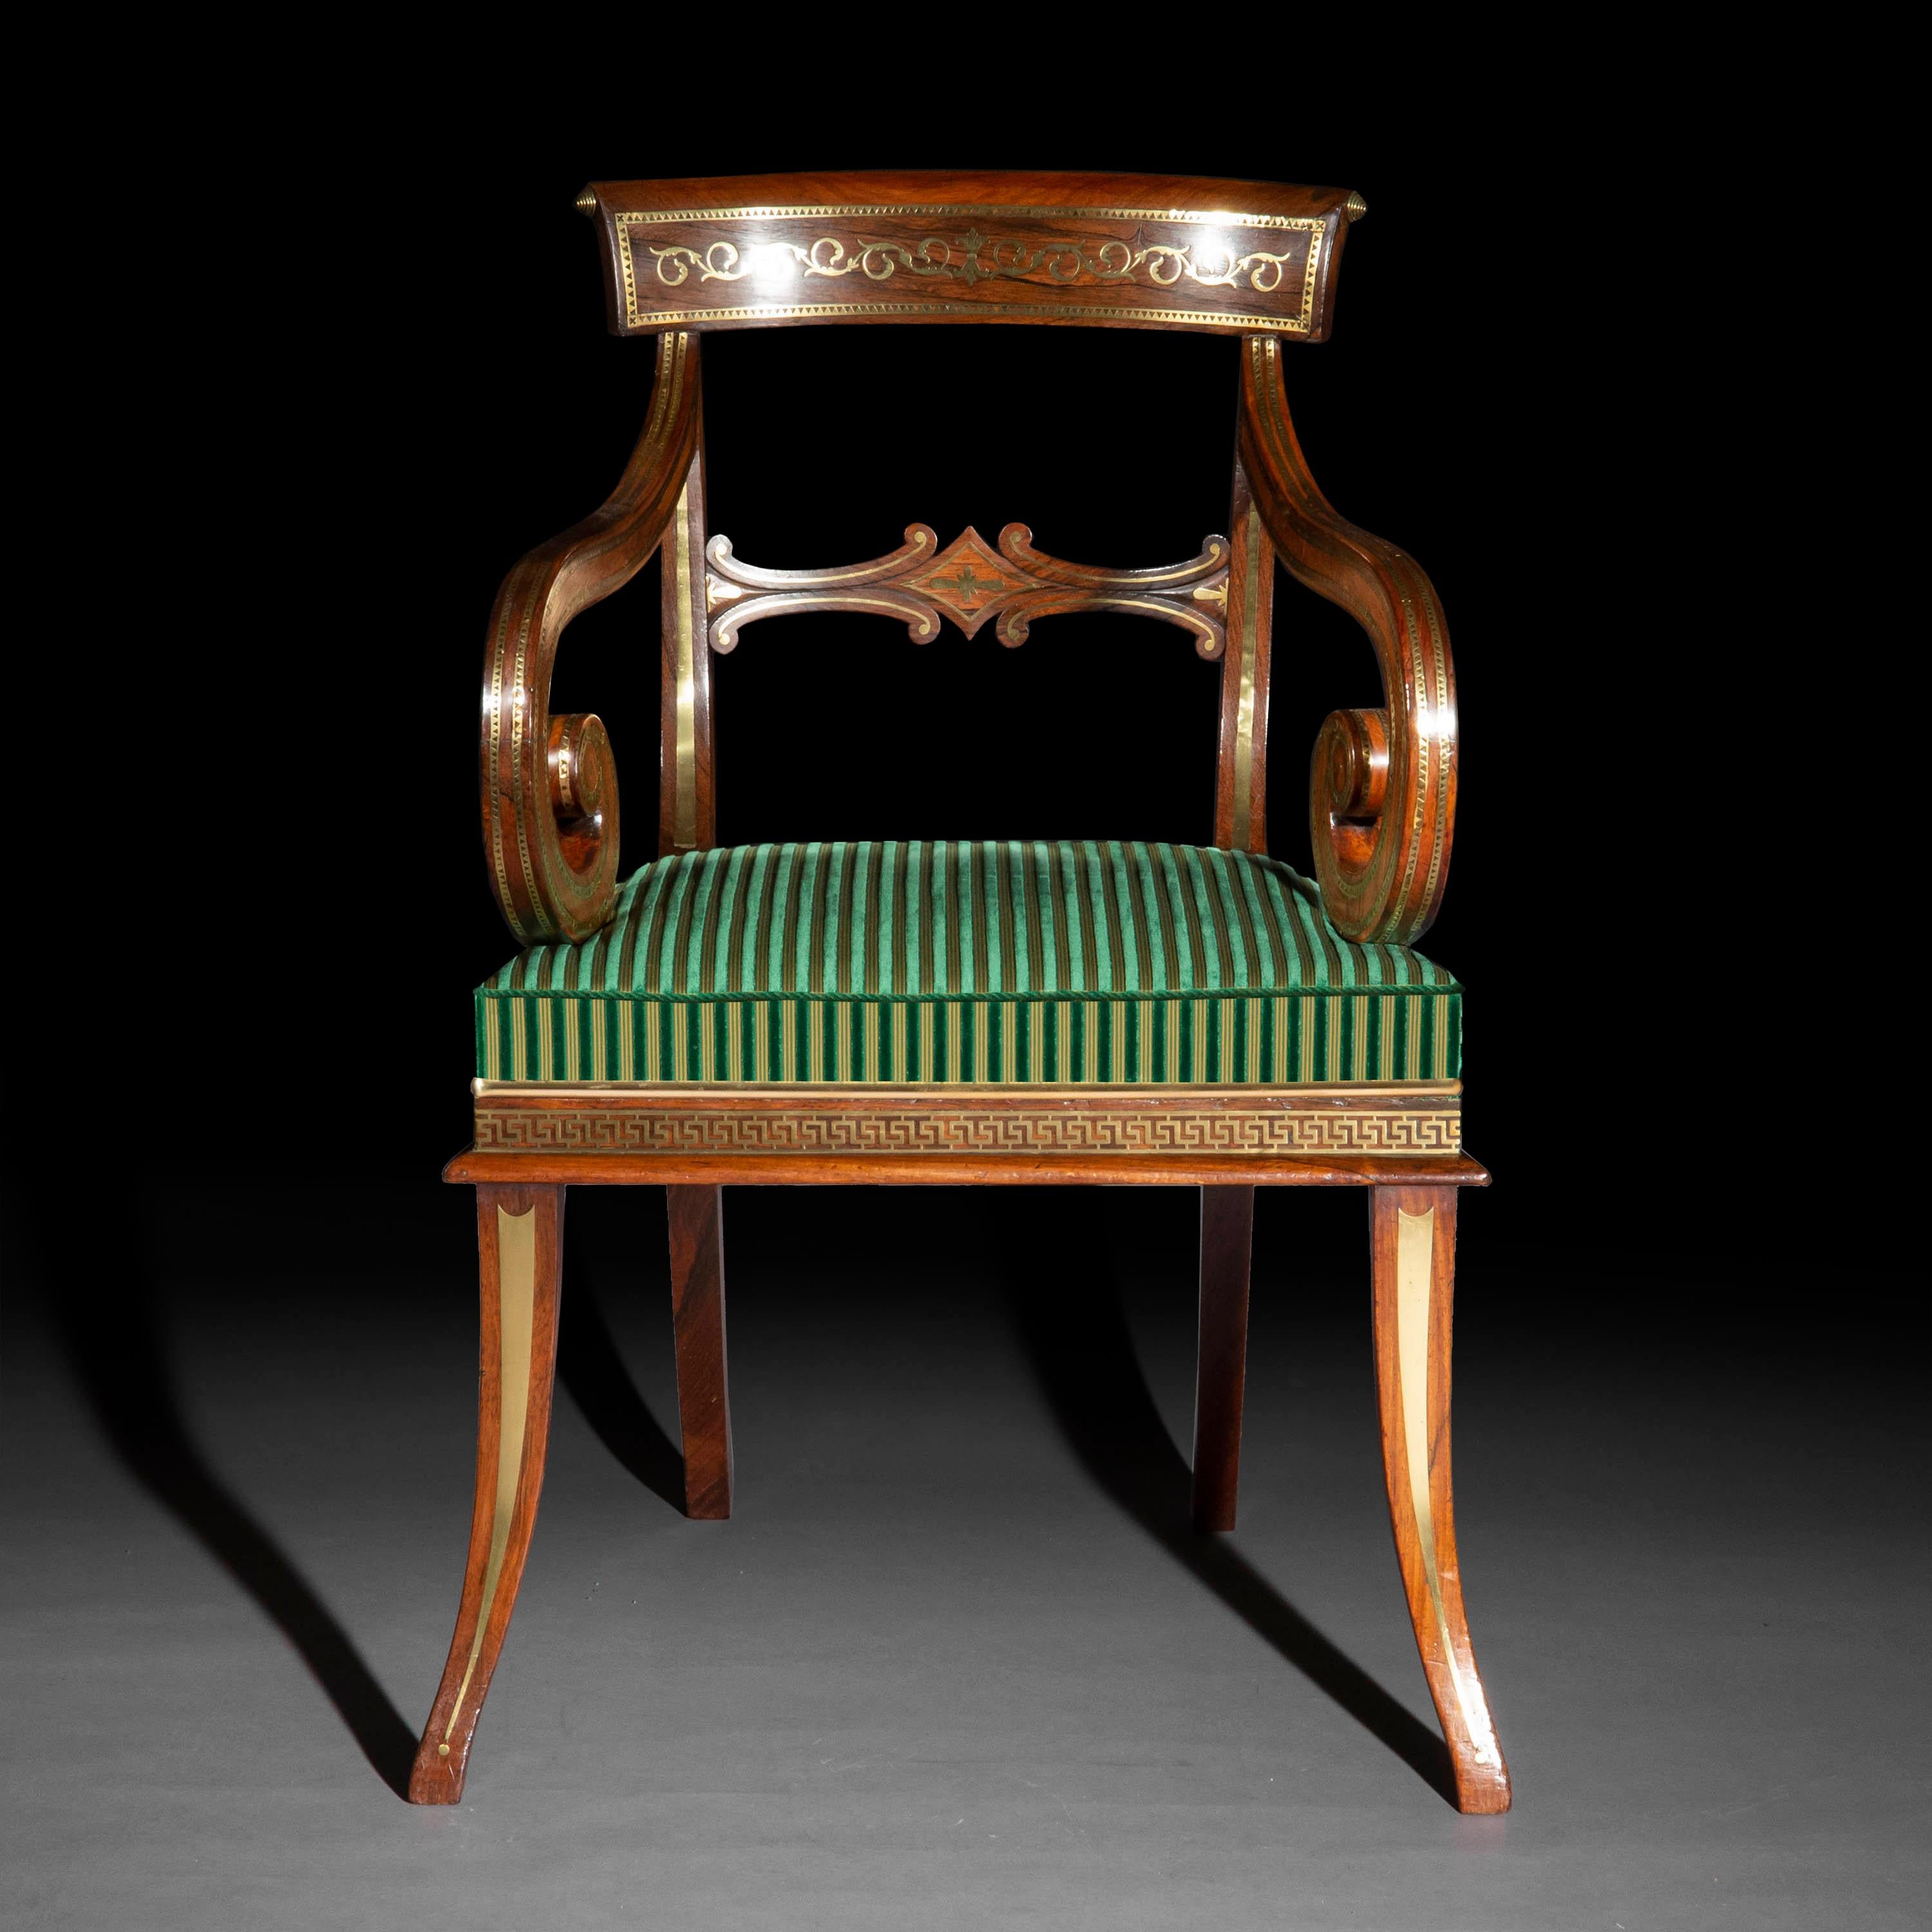 An exceptional early 19th century Regency period open armchair, of well-shaped Klismos outline and rare generous proportions, attributed to George Oakley,
England, circa 1810.

Why we like it
Its exquisite inlaid brass decoration together with